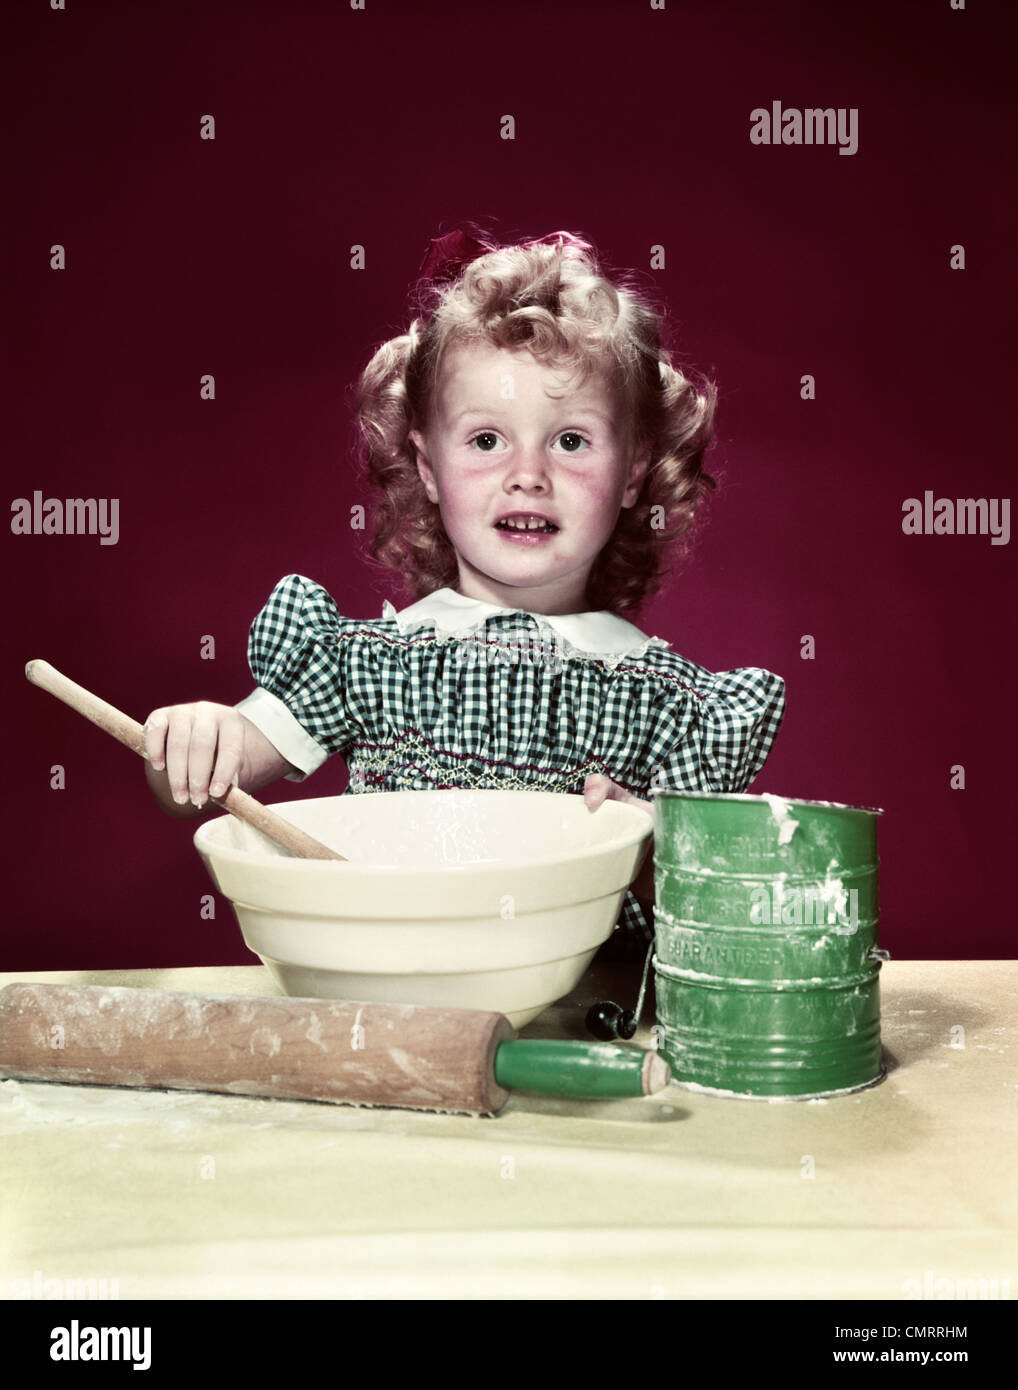 1940s GIRL WEARING CHECKED DRESS MIXING INGREDIENTS IN BOWL WITH WOODEN SPOON Stock Photo